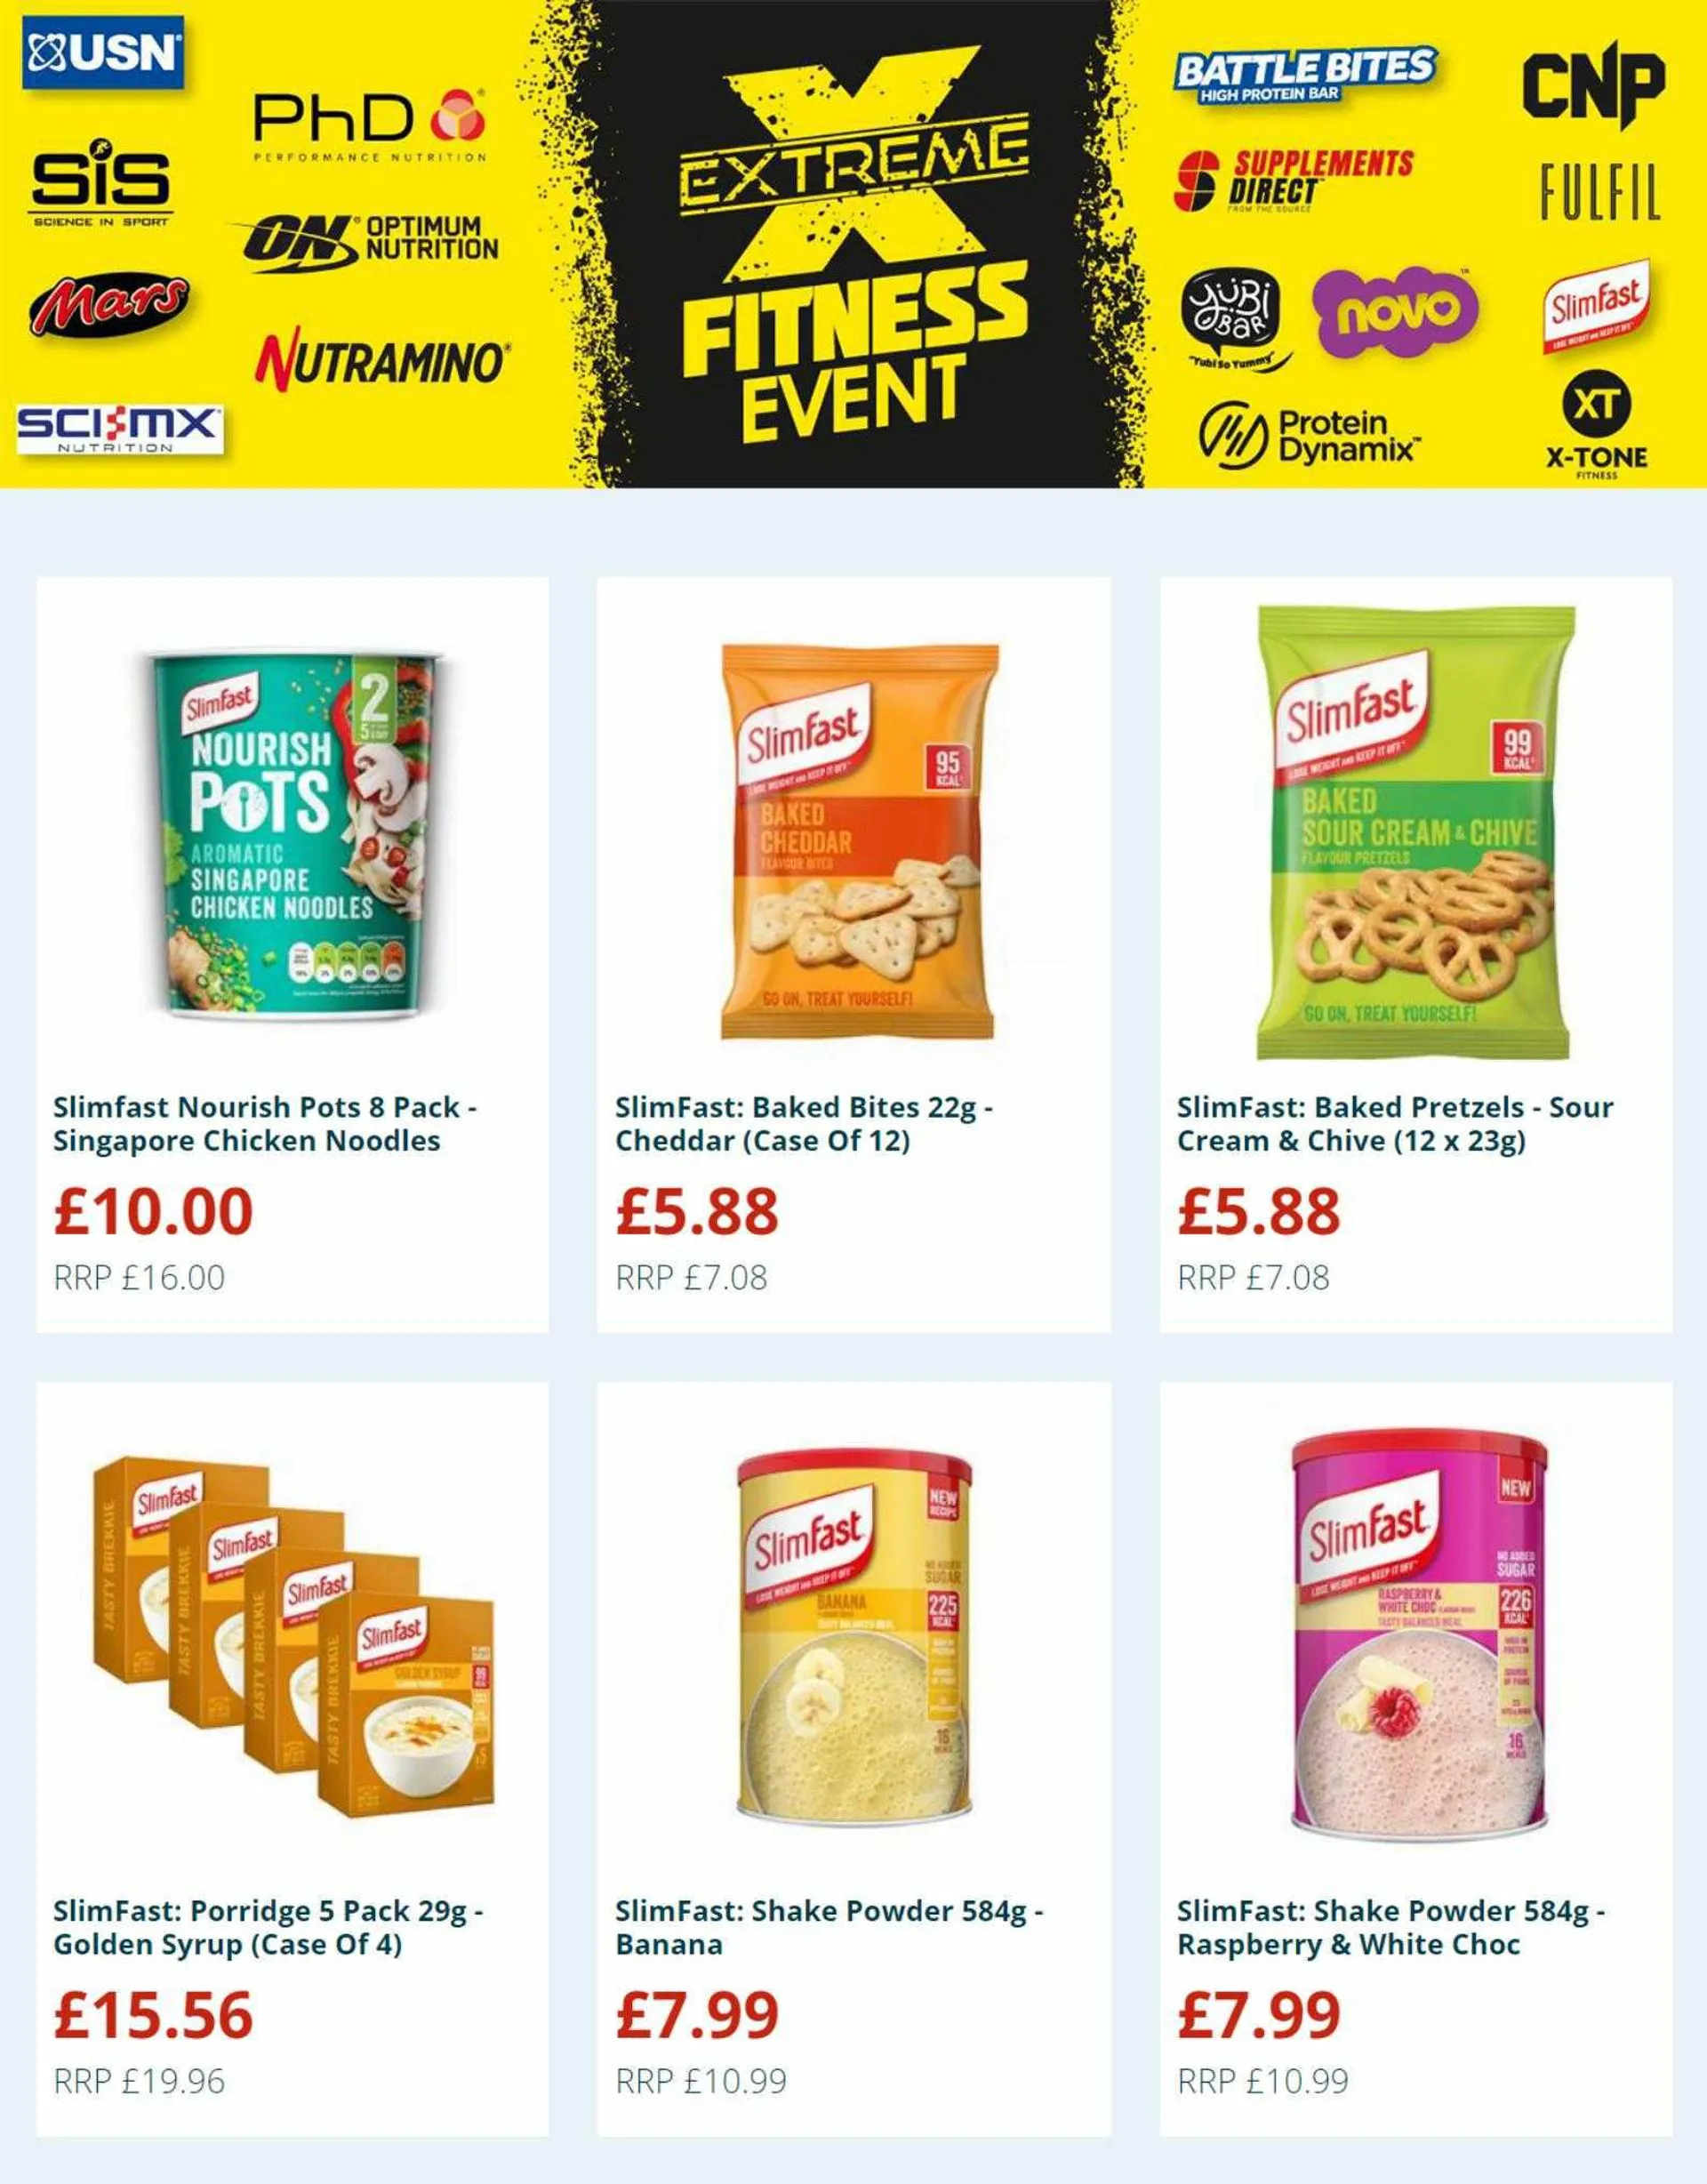 Home Bargains Weekly Offers - 5